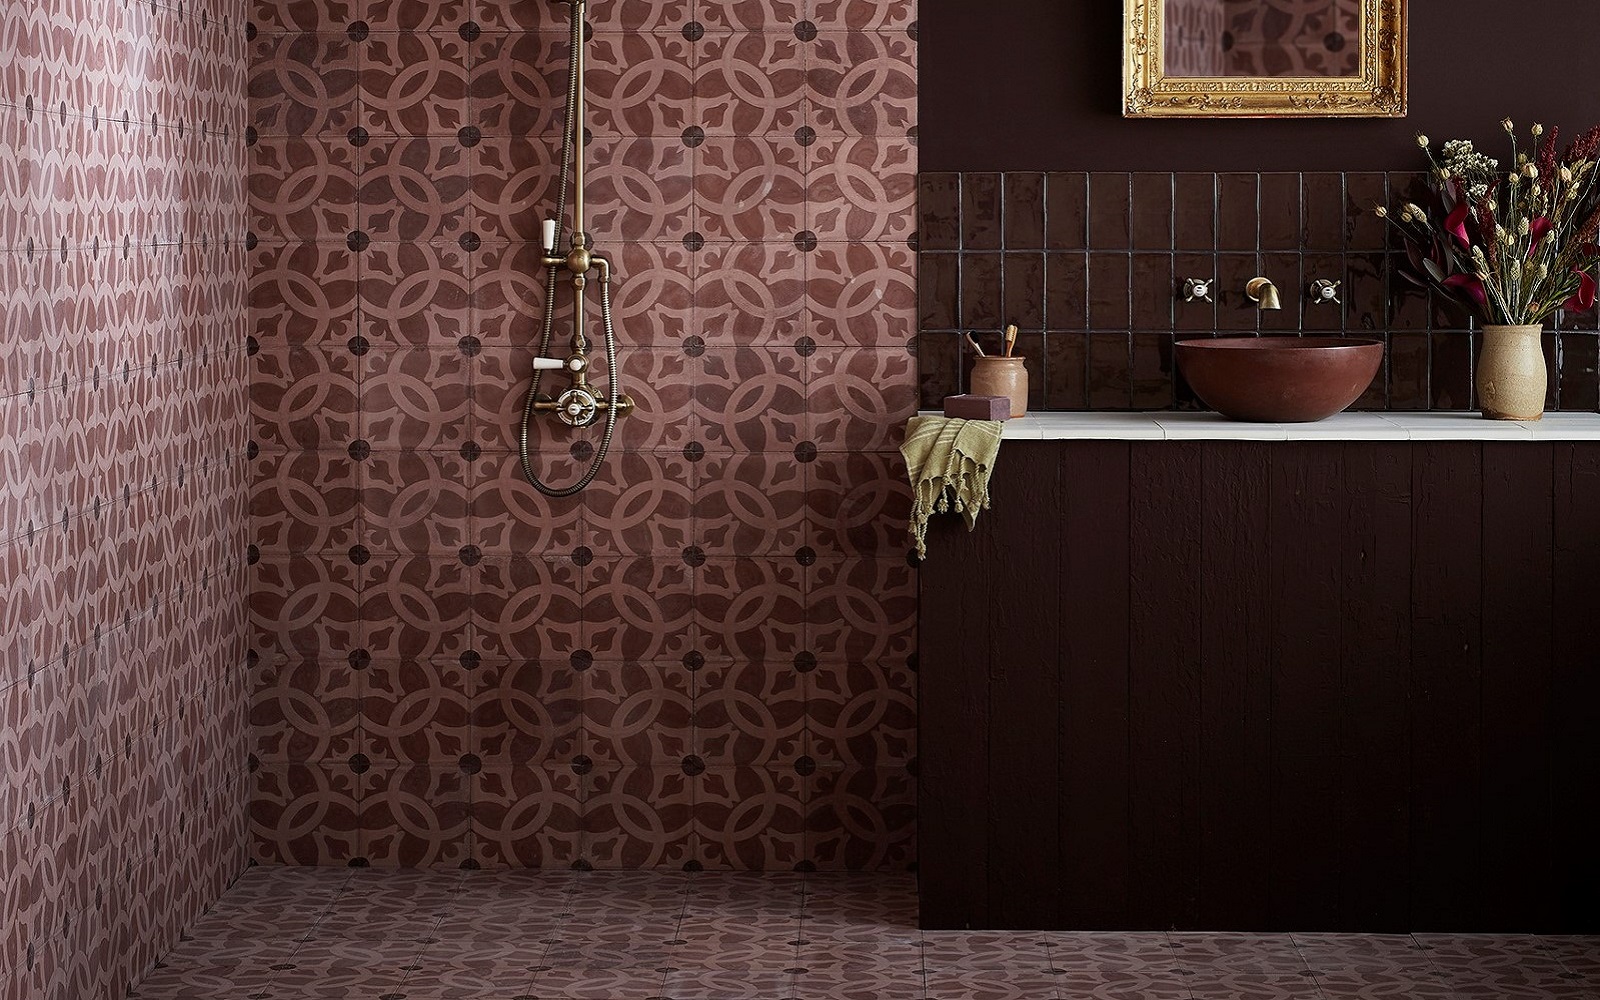 Hyperion tiles in brown encaustic tile on floor and wall of a wetroom